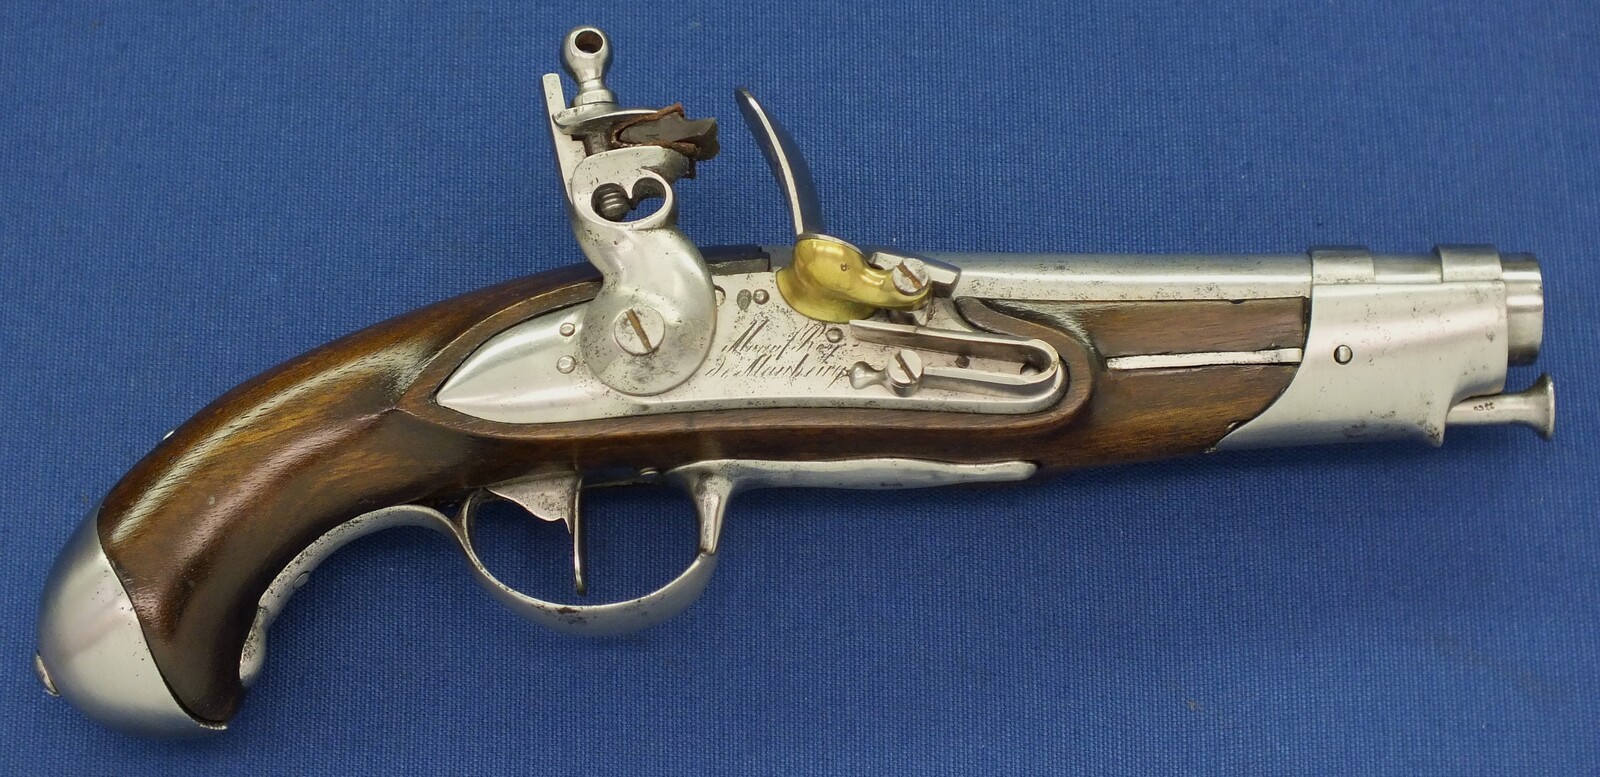 An antique 19th century French Model AN9 Gendarmerie Flintlock pistol. Lock Signed: Manuf. Royal de Maubeuge. Caliber 15,2mm, length 25,5cm. In very good condition. Price 1.700 euro